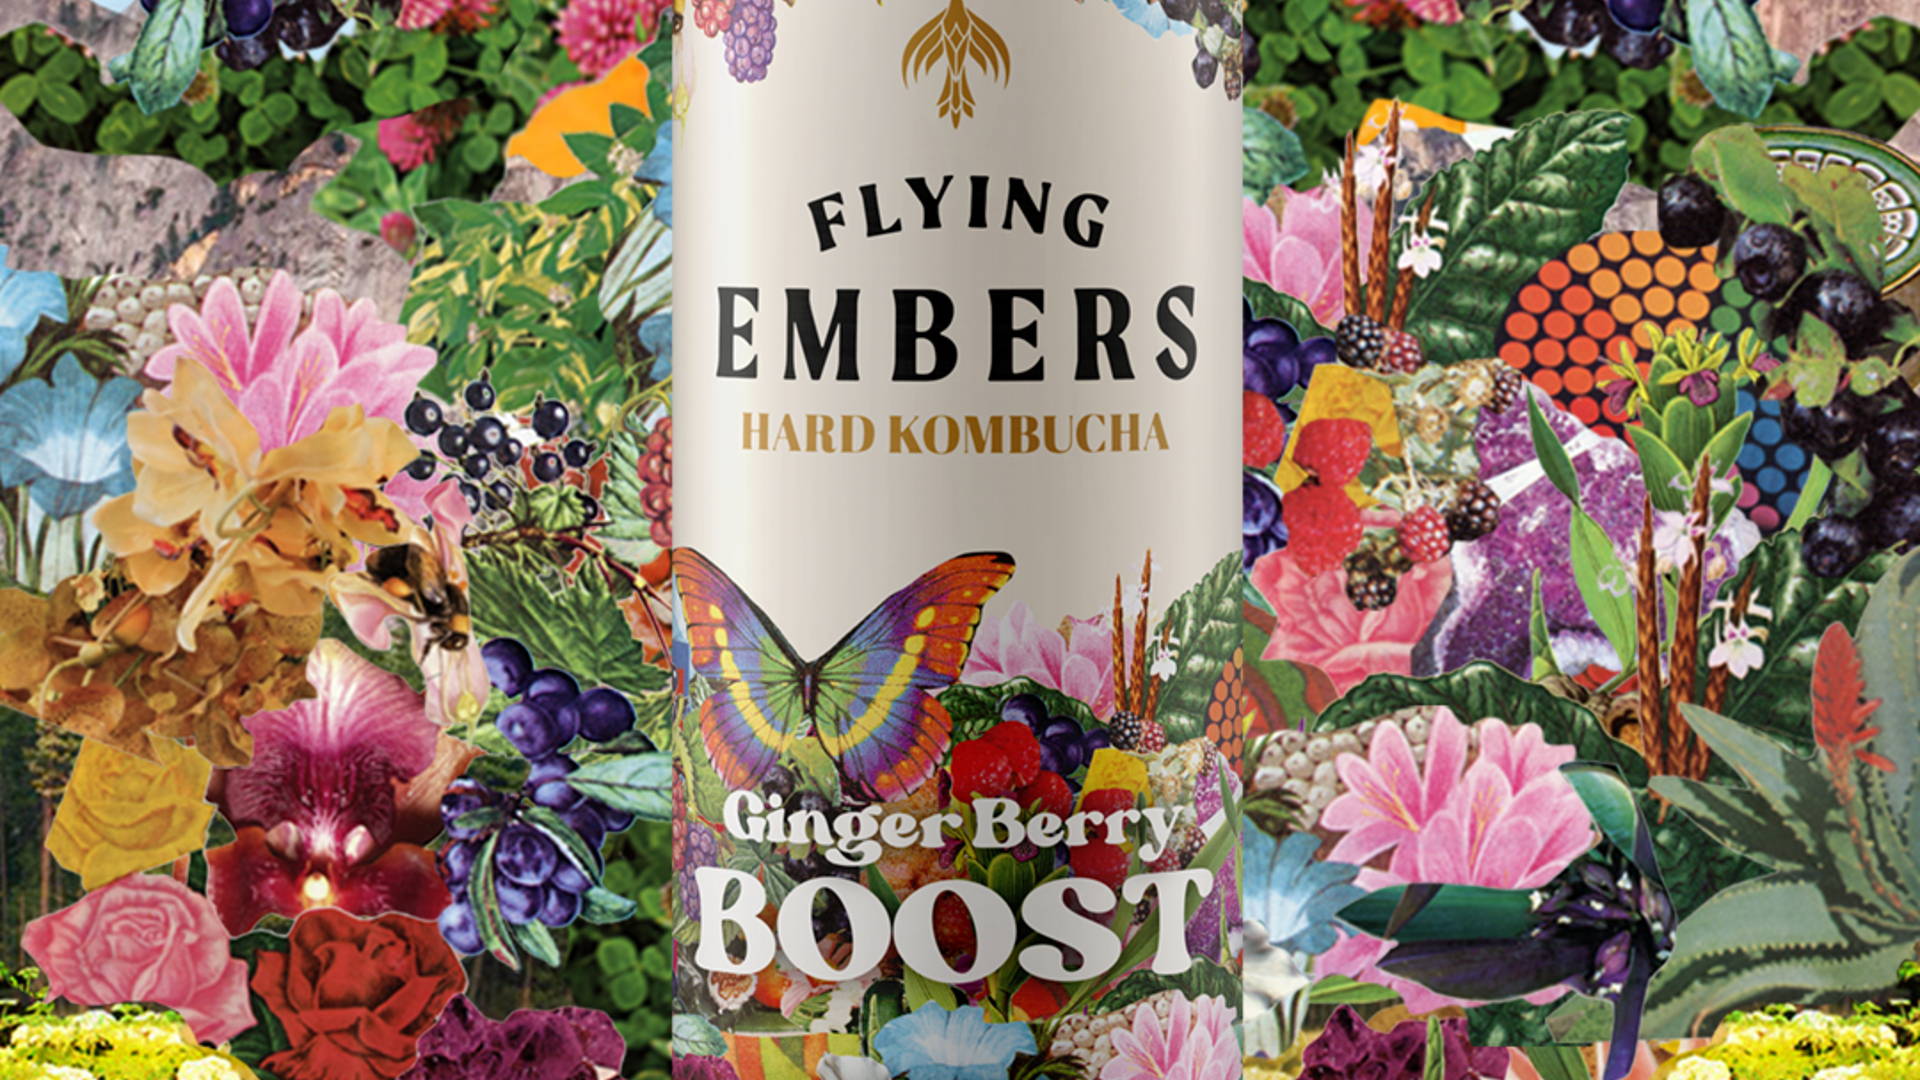 Featured image for This Can Of Flying Embers With Art By Dewey Saunders Will Leave You Buzzing With Joy